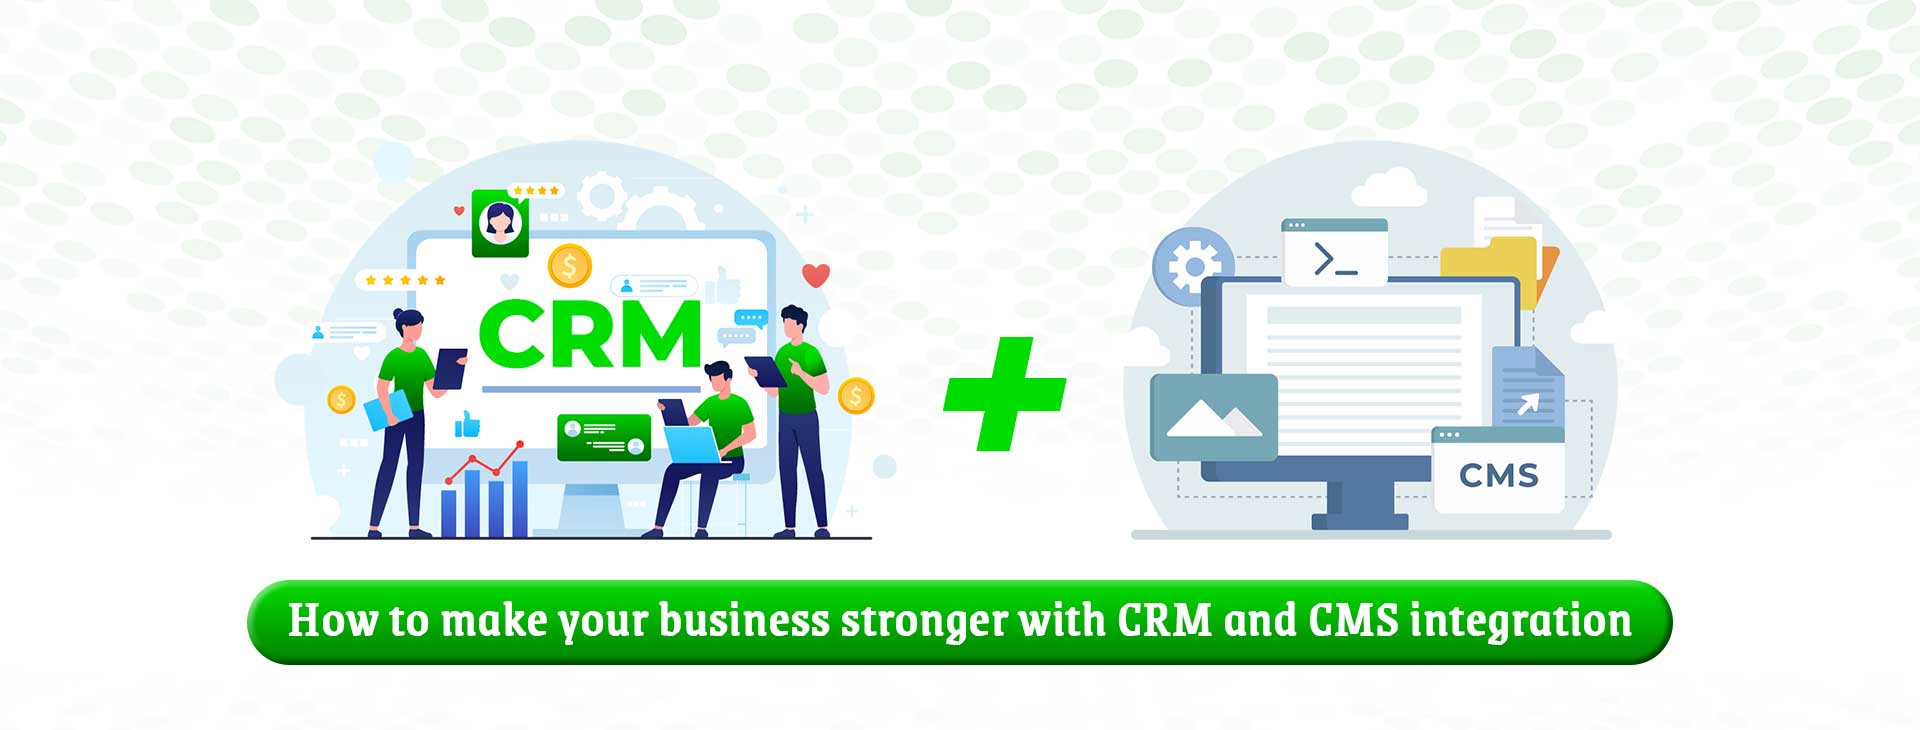 How to Make Your Business Stronger with CRM and CMS Integration